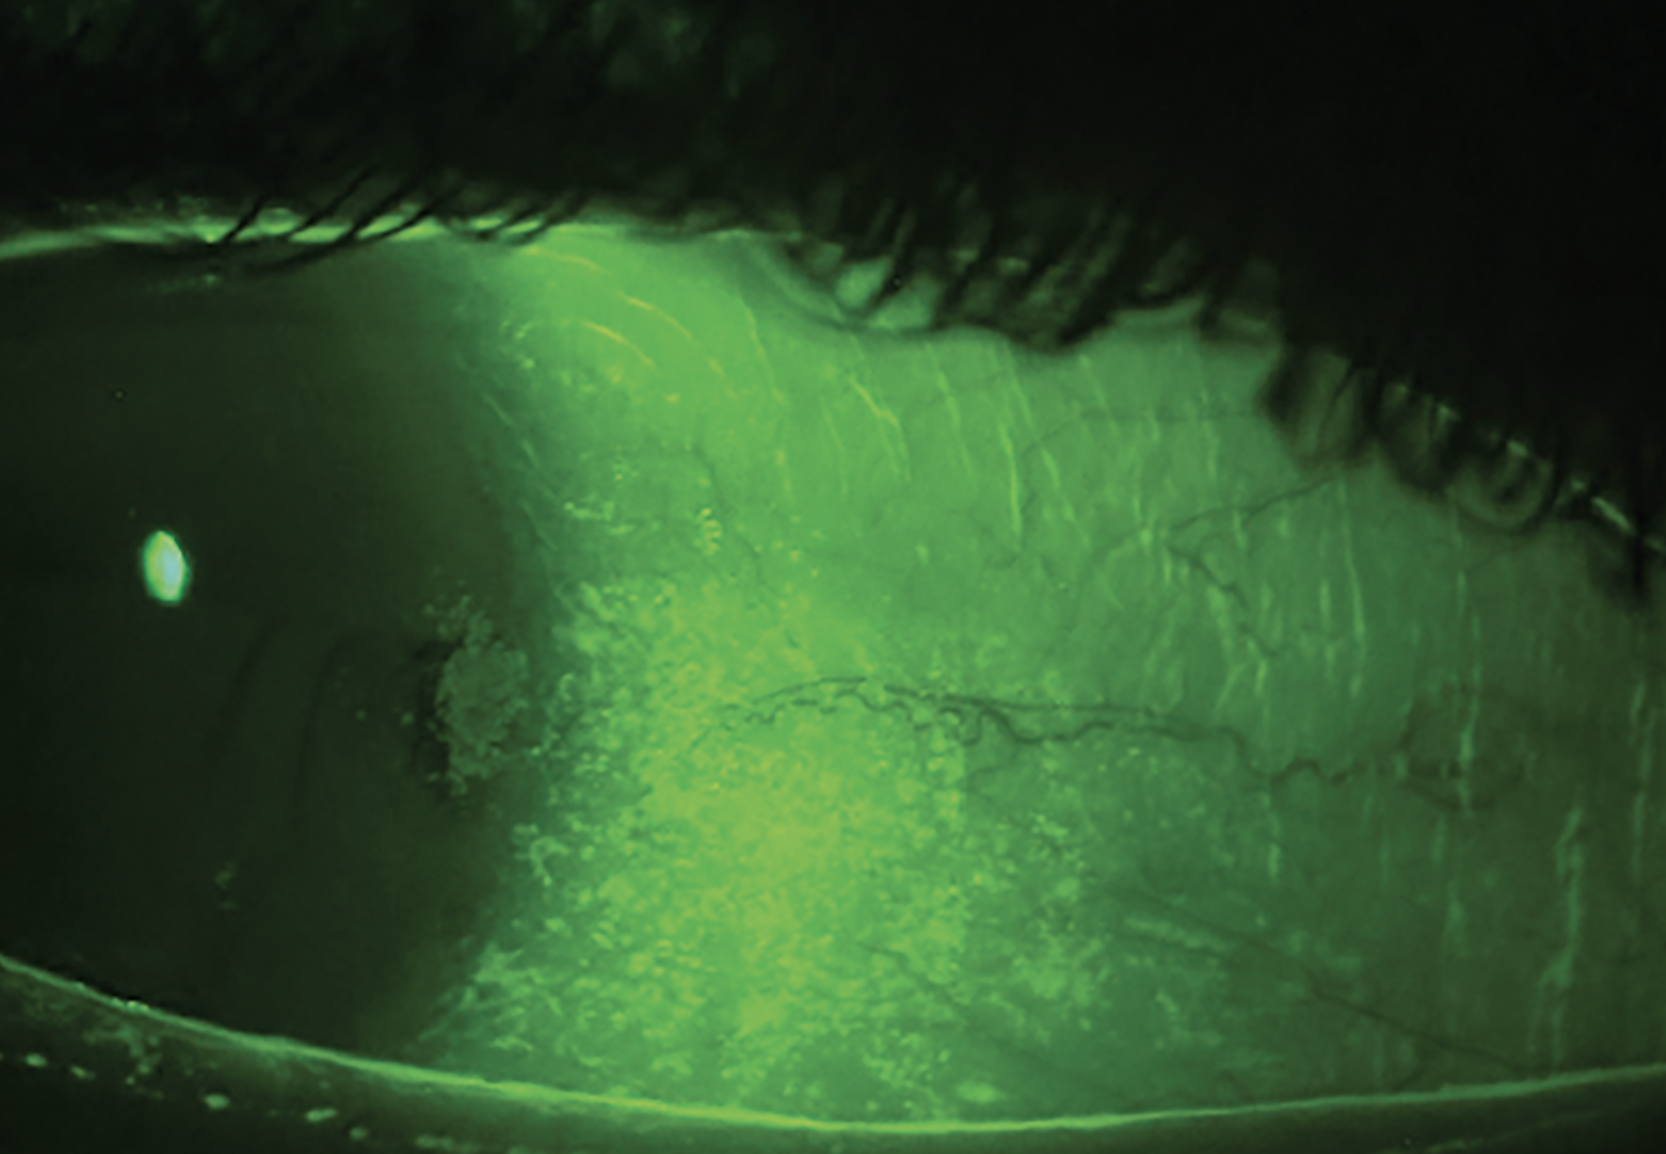 Fig. 2a. Grade 2-3+ conjunctival staining with patchy corneal staining. This is a common staining pattern seen in Sjögren’s syndrome. NaFl and a Wratten filter highlight conjunctival staining and show damage to the goblet cells and mucin layer of the tear film. Significant temporal conjunctival staining, patchy corneal staining and a reduced tear meniscus seen together warrant testing for Sjögren’s syndrome.